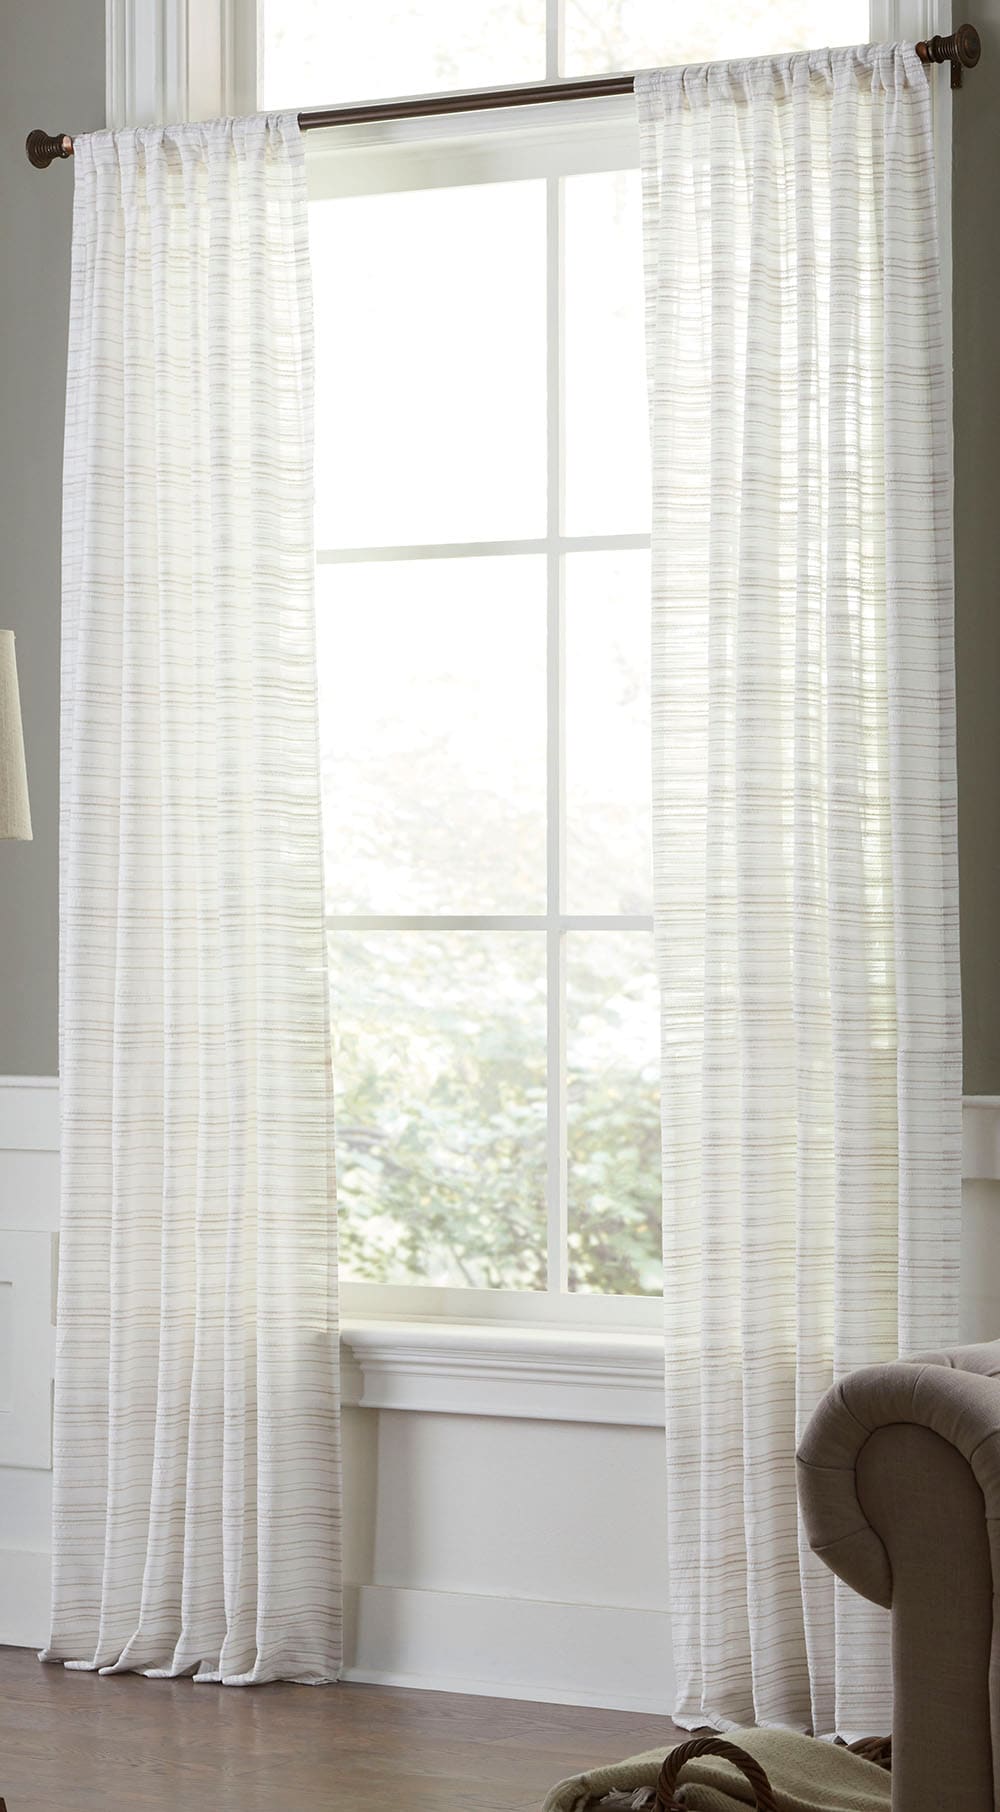 allen + roth 84-in Taupe Light Filtering Rod Pocket Single Curtain Panel in  the Curtains & Drapes department at